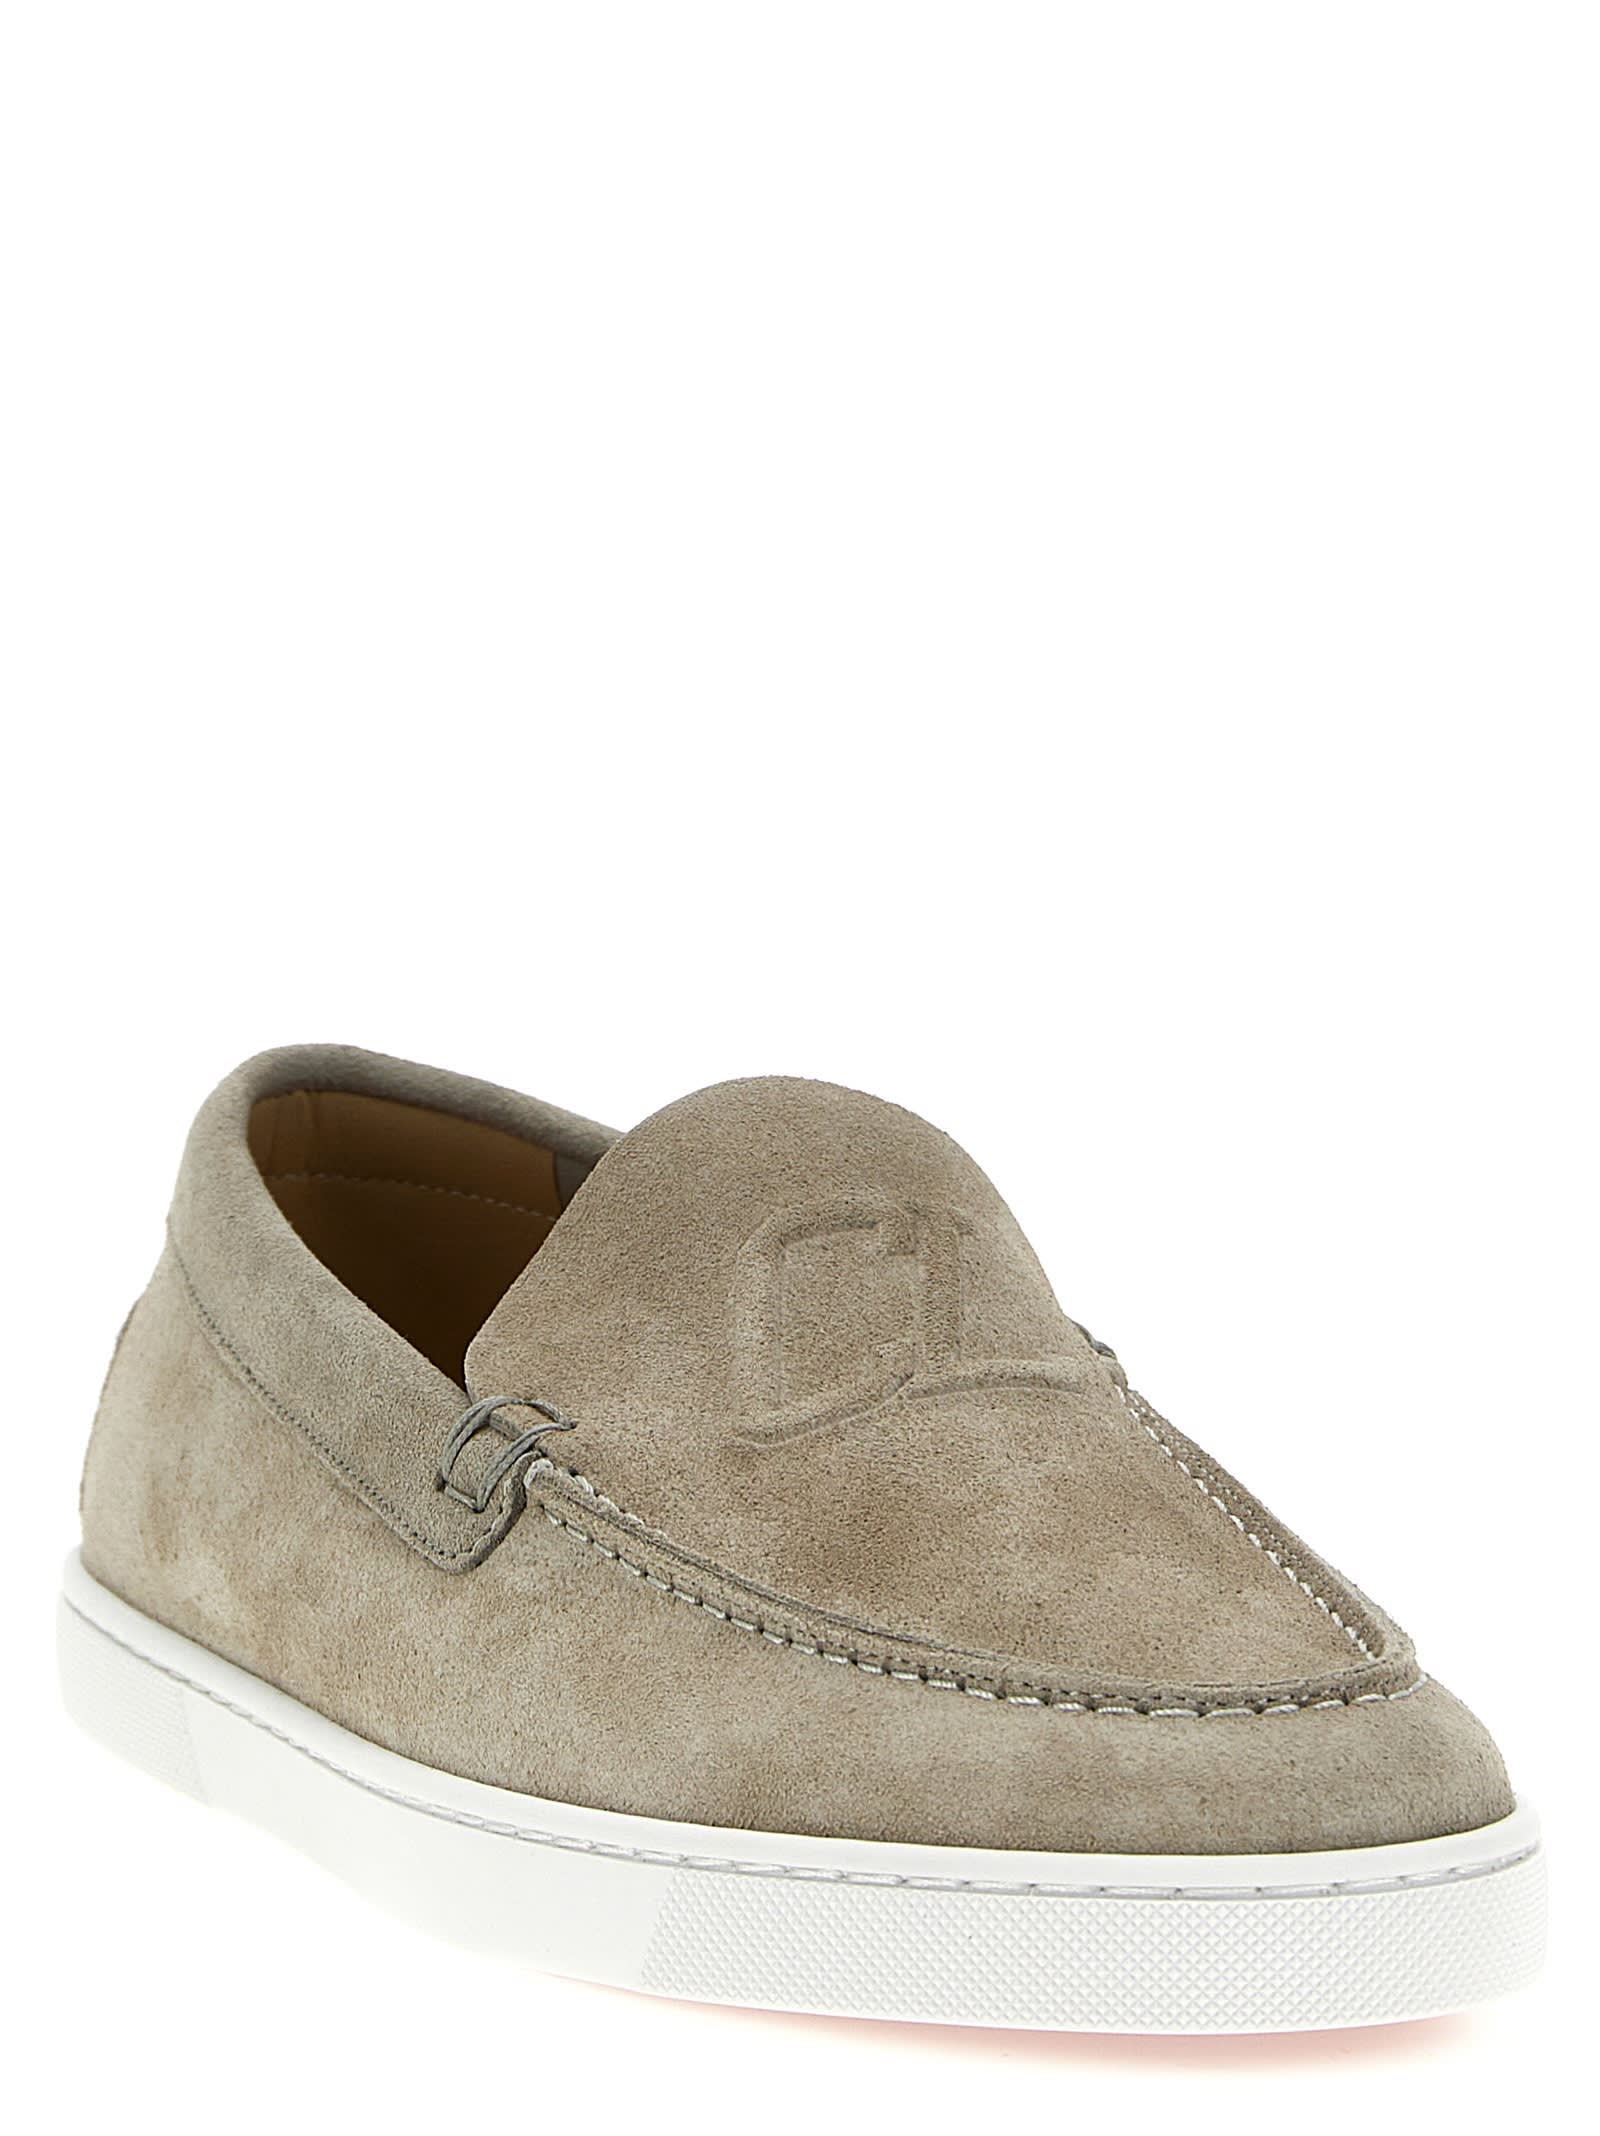 Shop Christian Louboutin Varsiboat Loafers In Gray